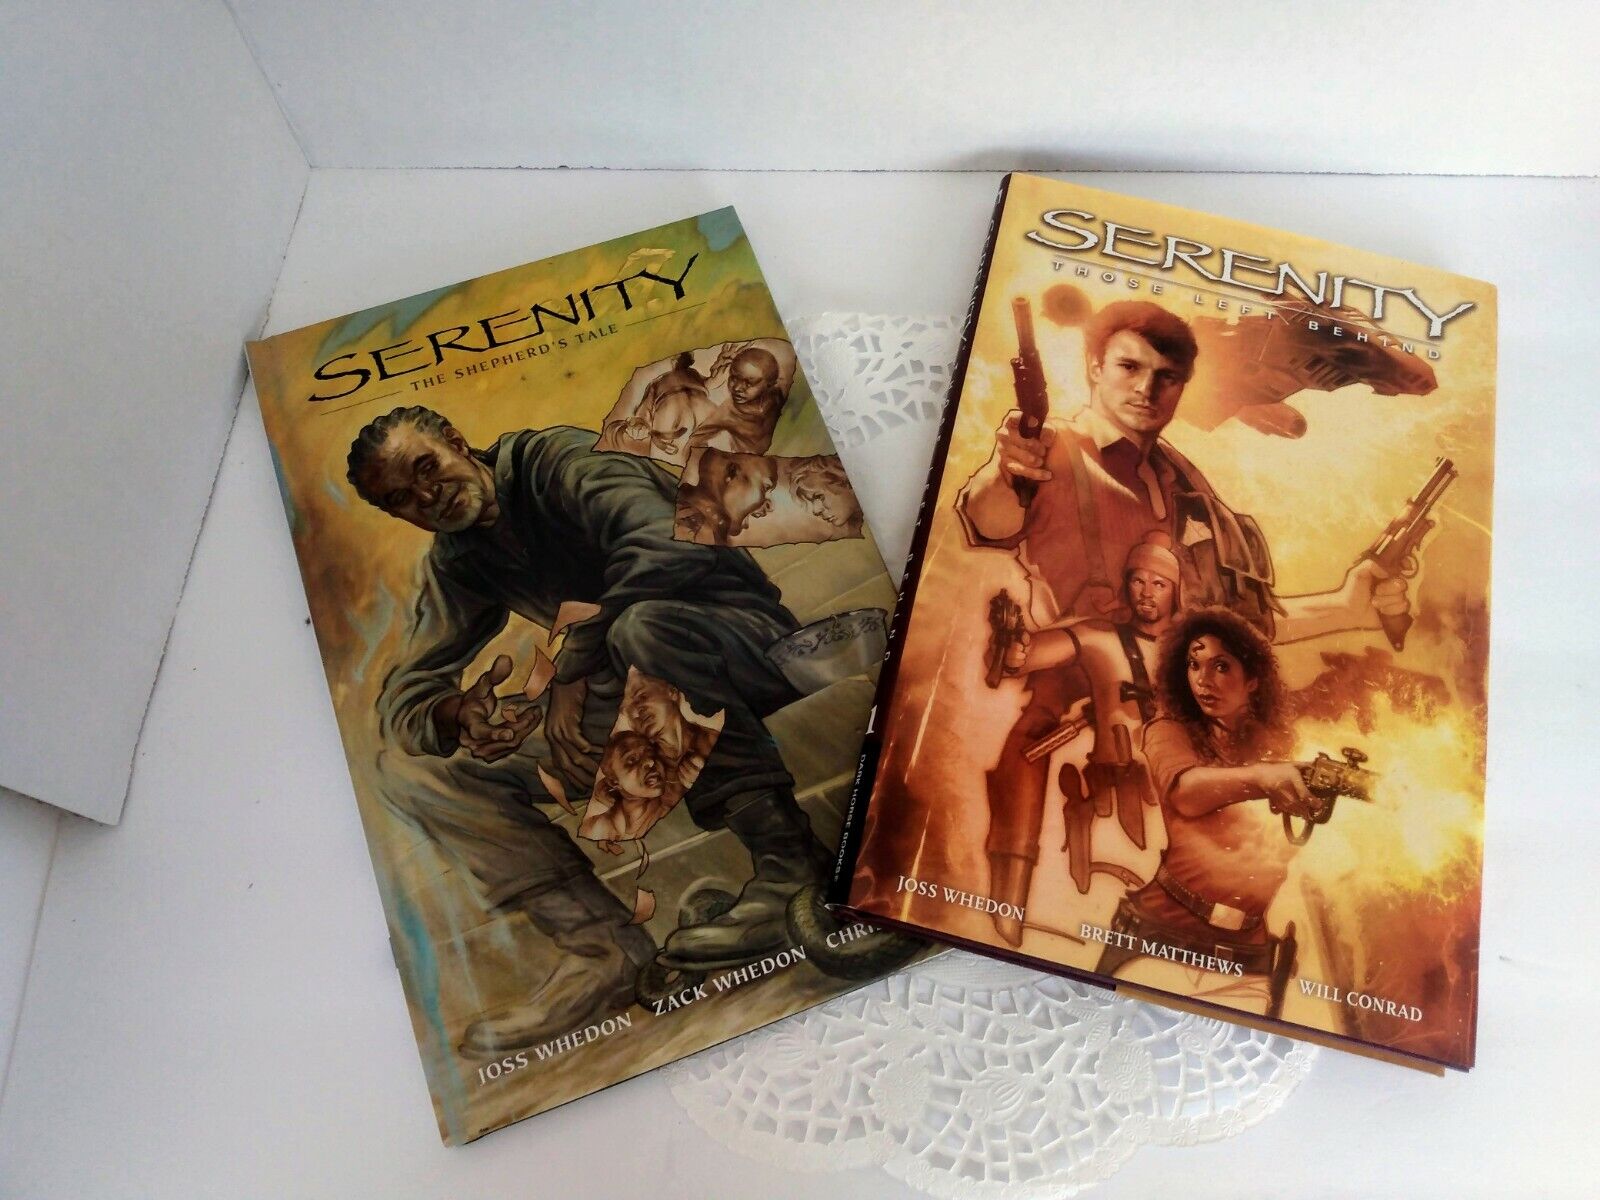  Serenity: Those Left Behind NOV 2007 first edition/The Shepherd's Tale 2010